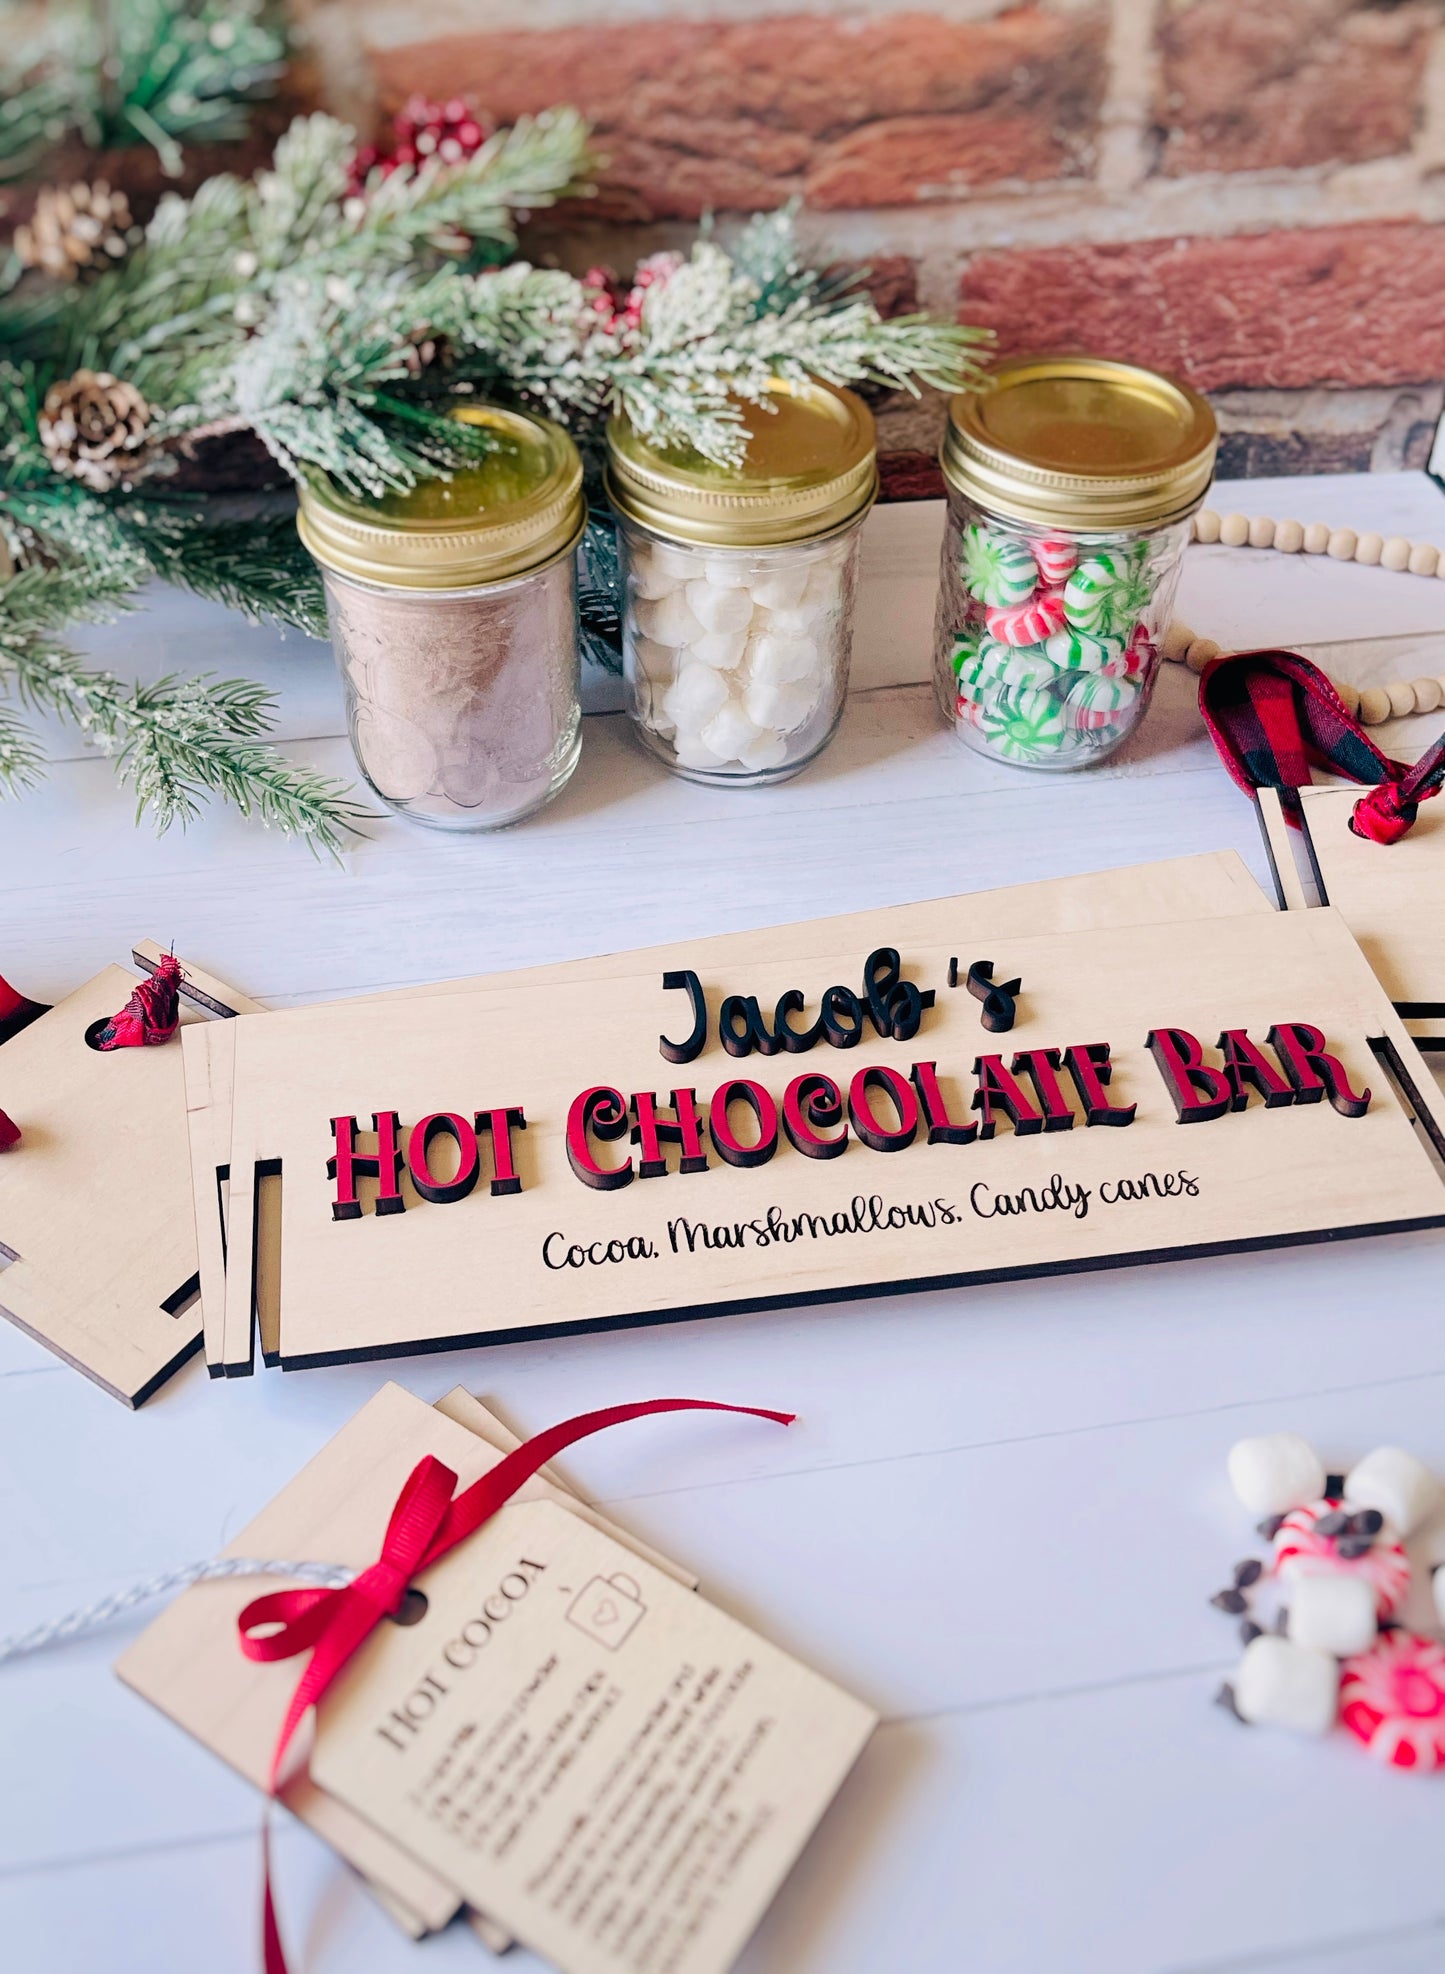 Personalized hot chocolate bar